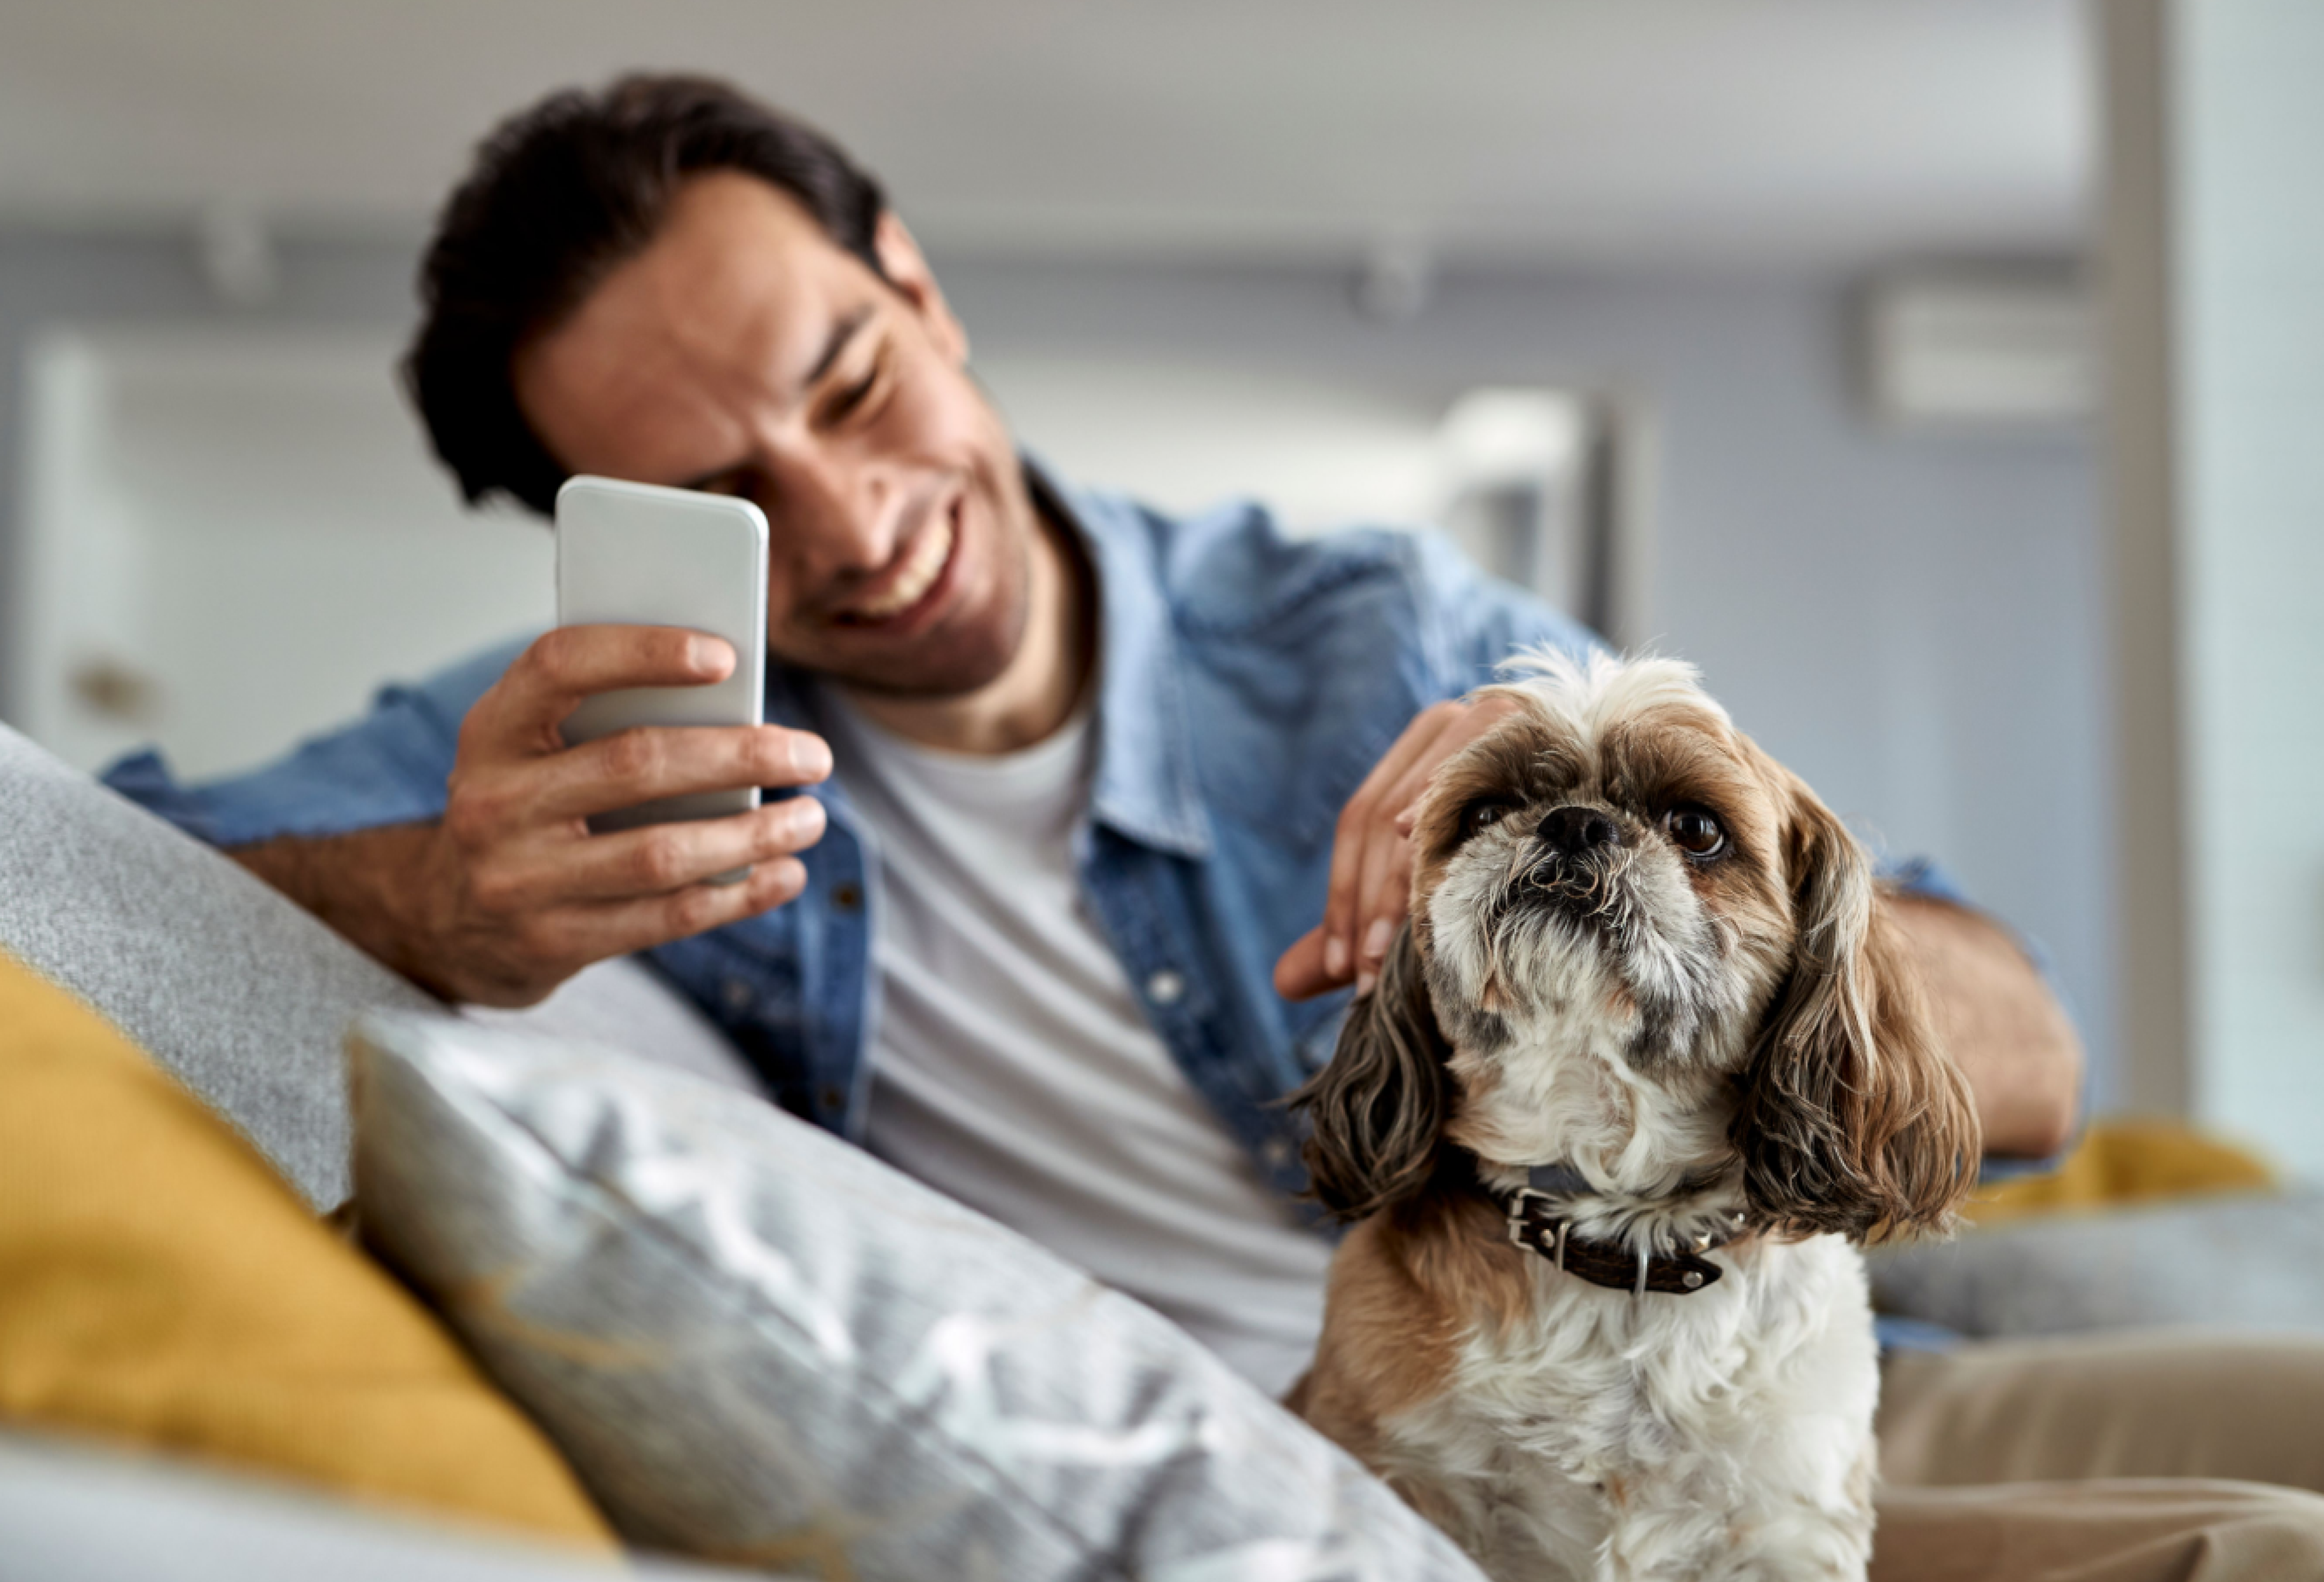 Person with phone in hand and petting a dog